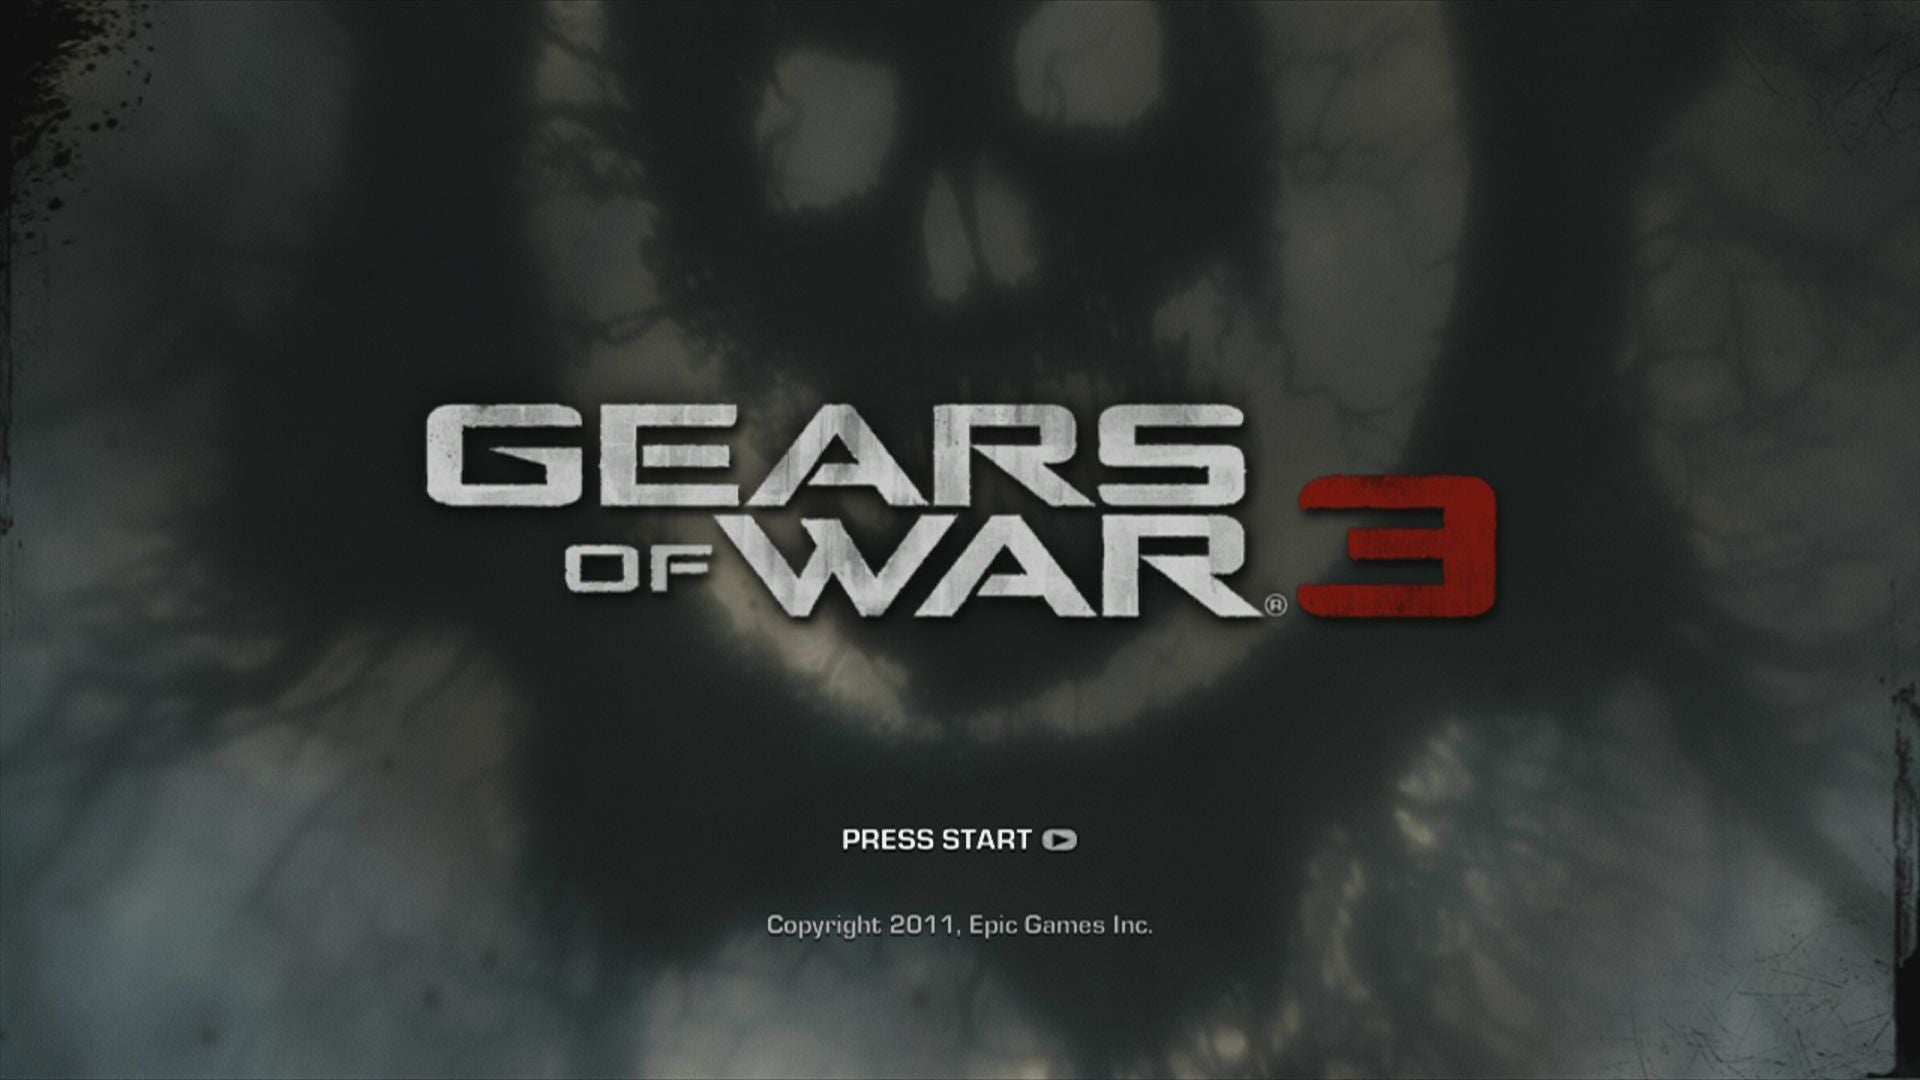 Gears of War 3 - Xbox 360 Game